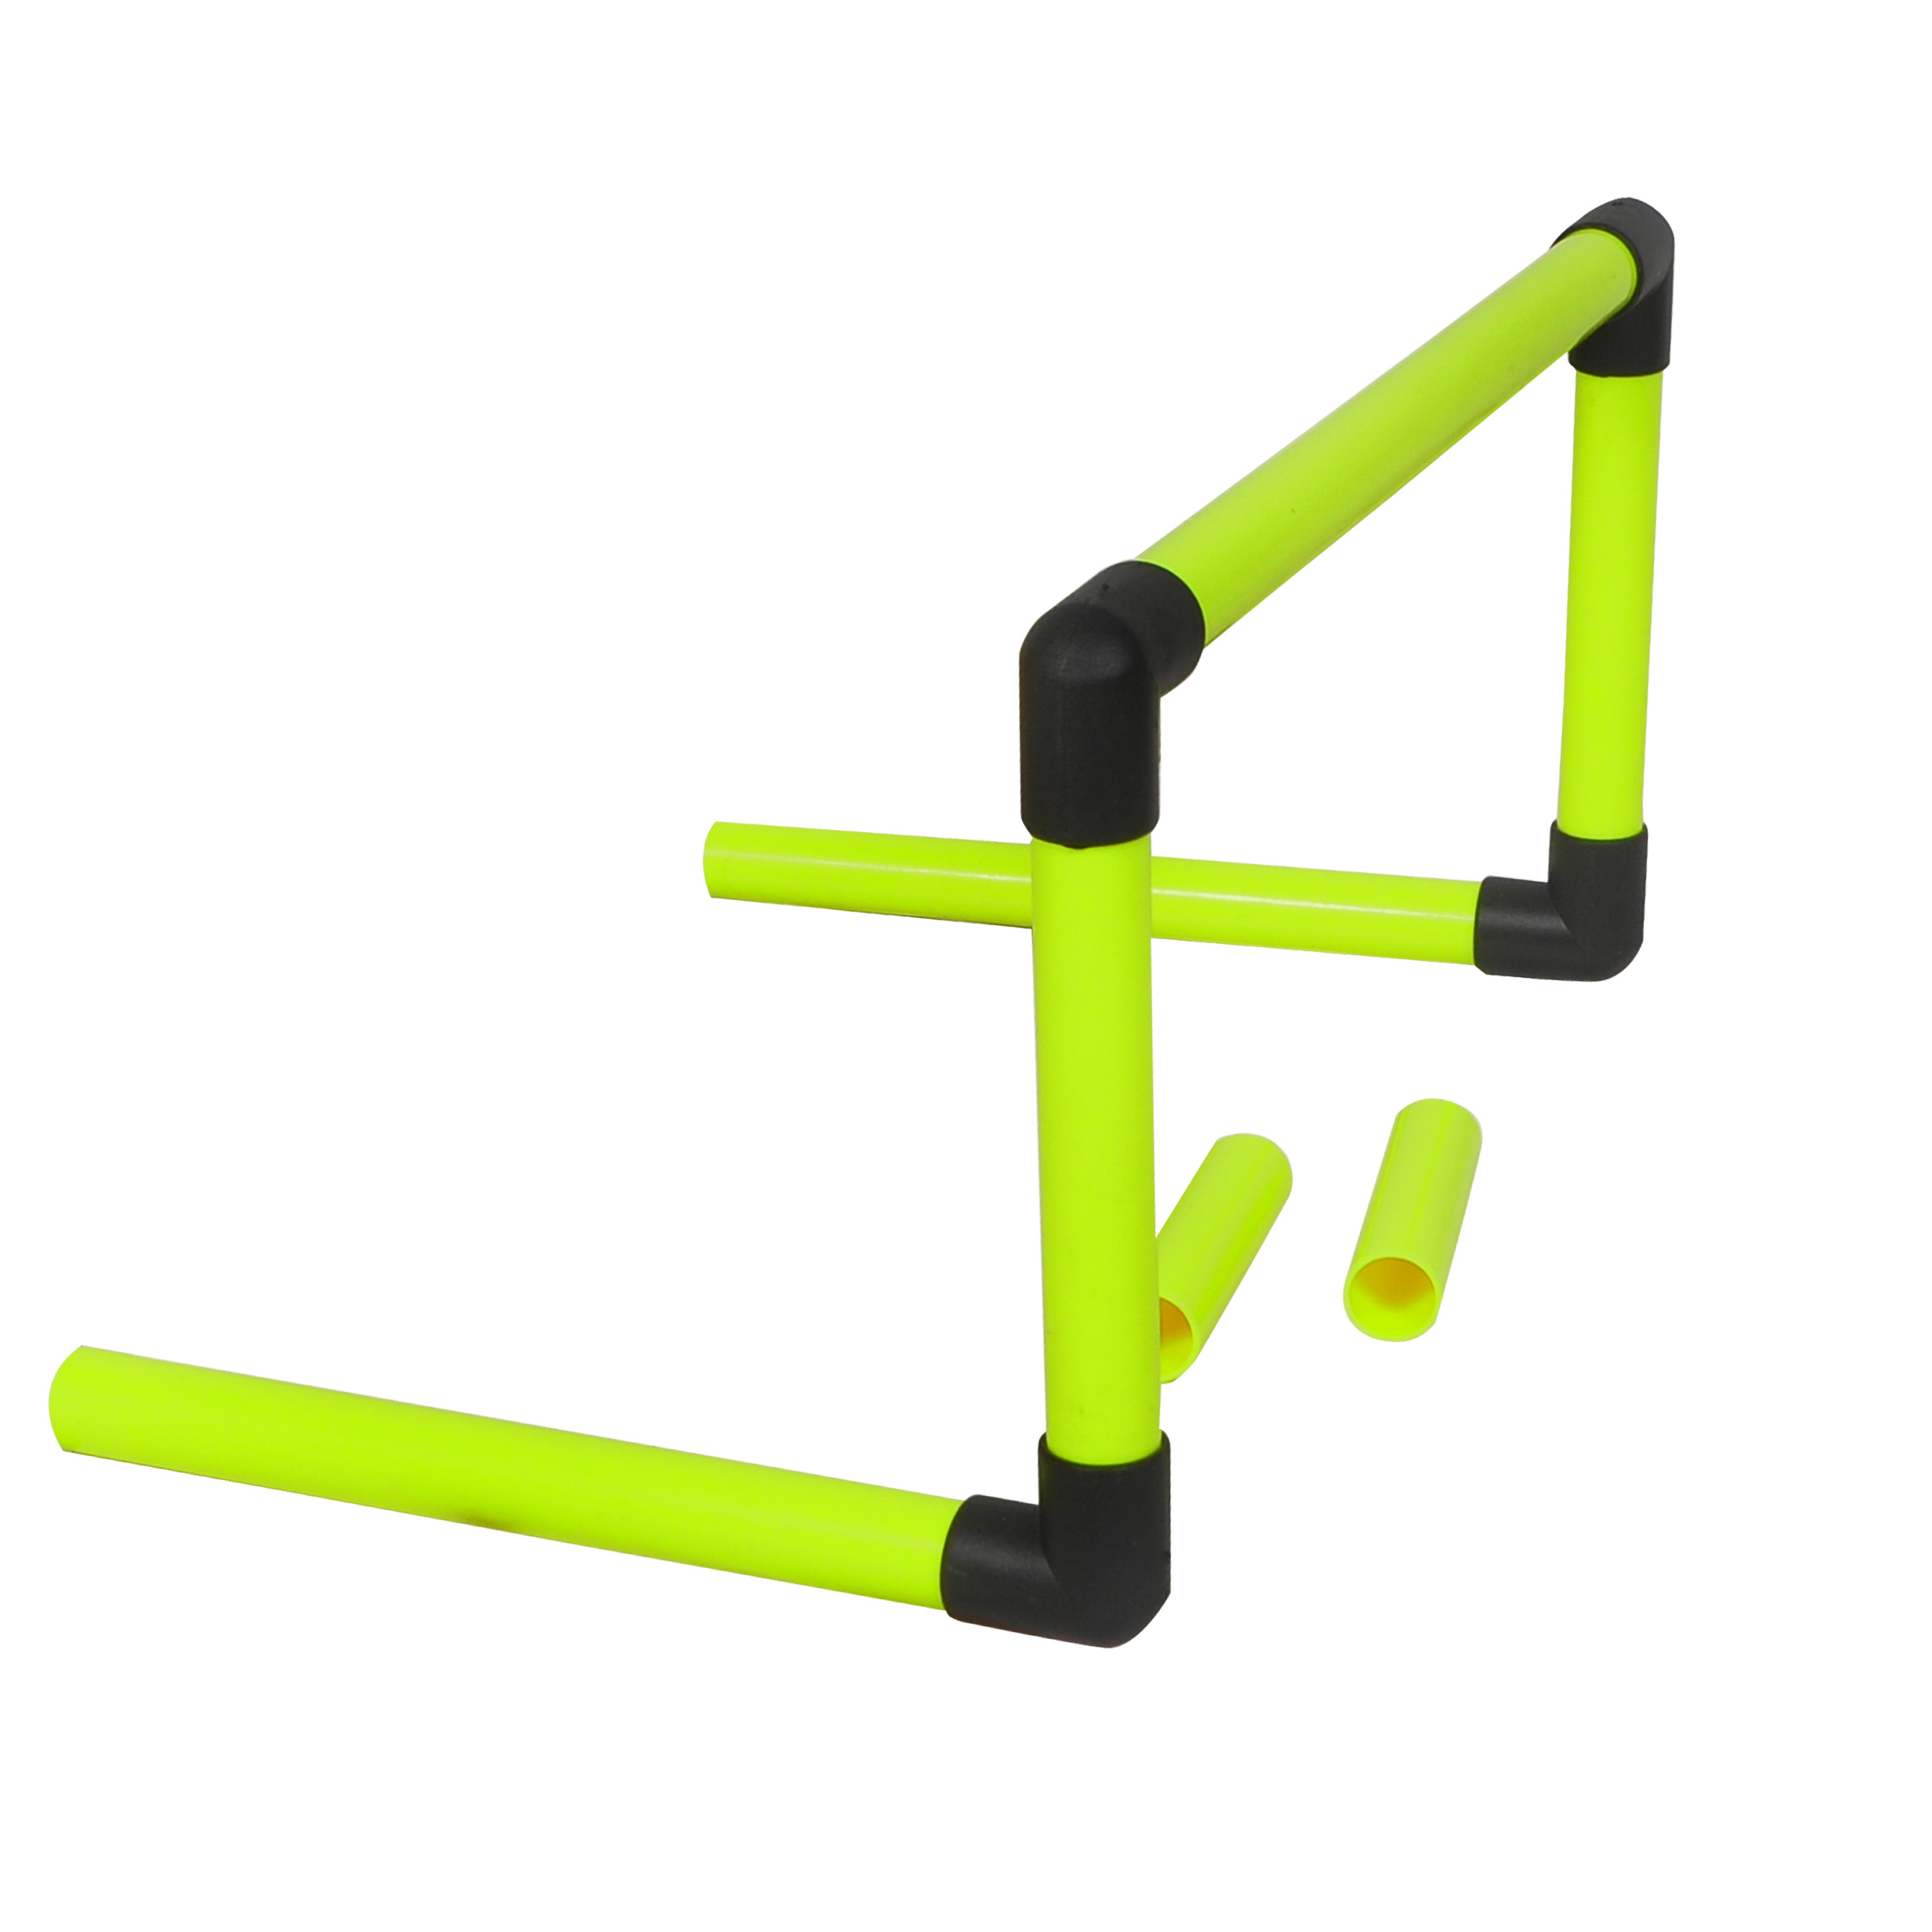 Collapsible agility hurdle